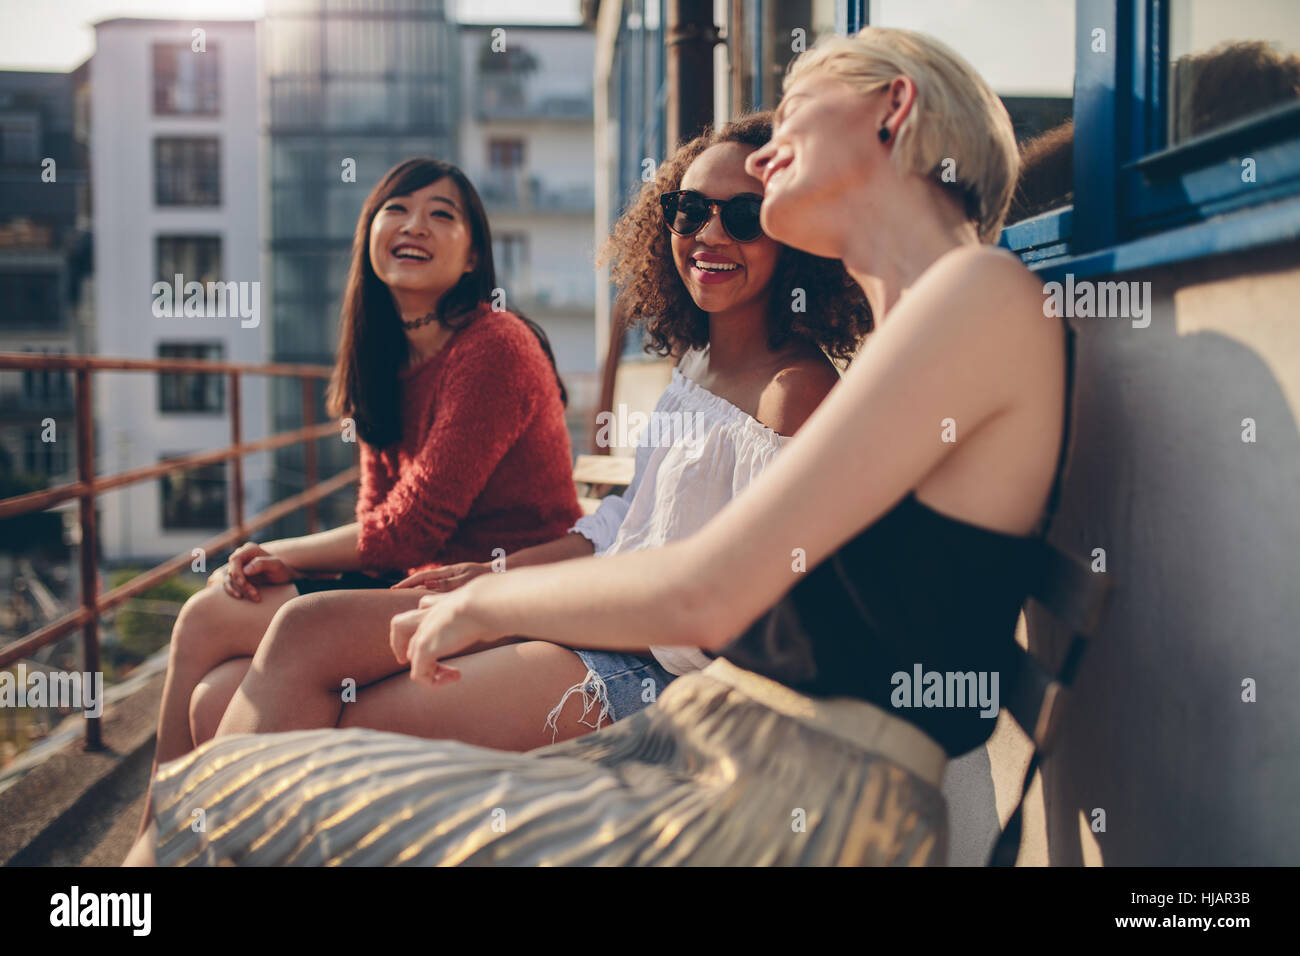 Three young female friends sitting in balcony and having fun. Women relaxing outdoors and chatting. Stock Photo